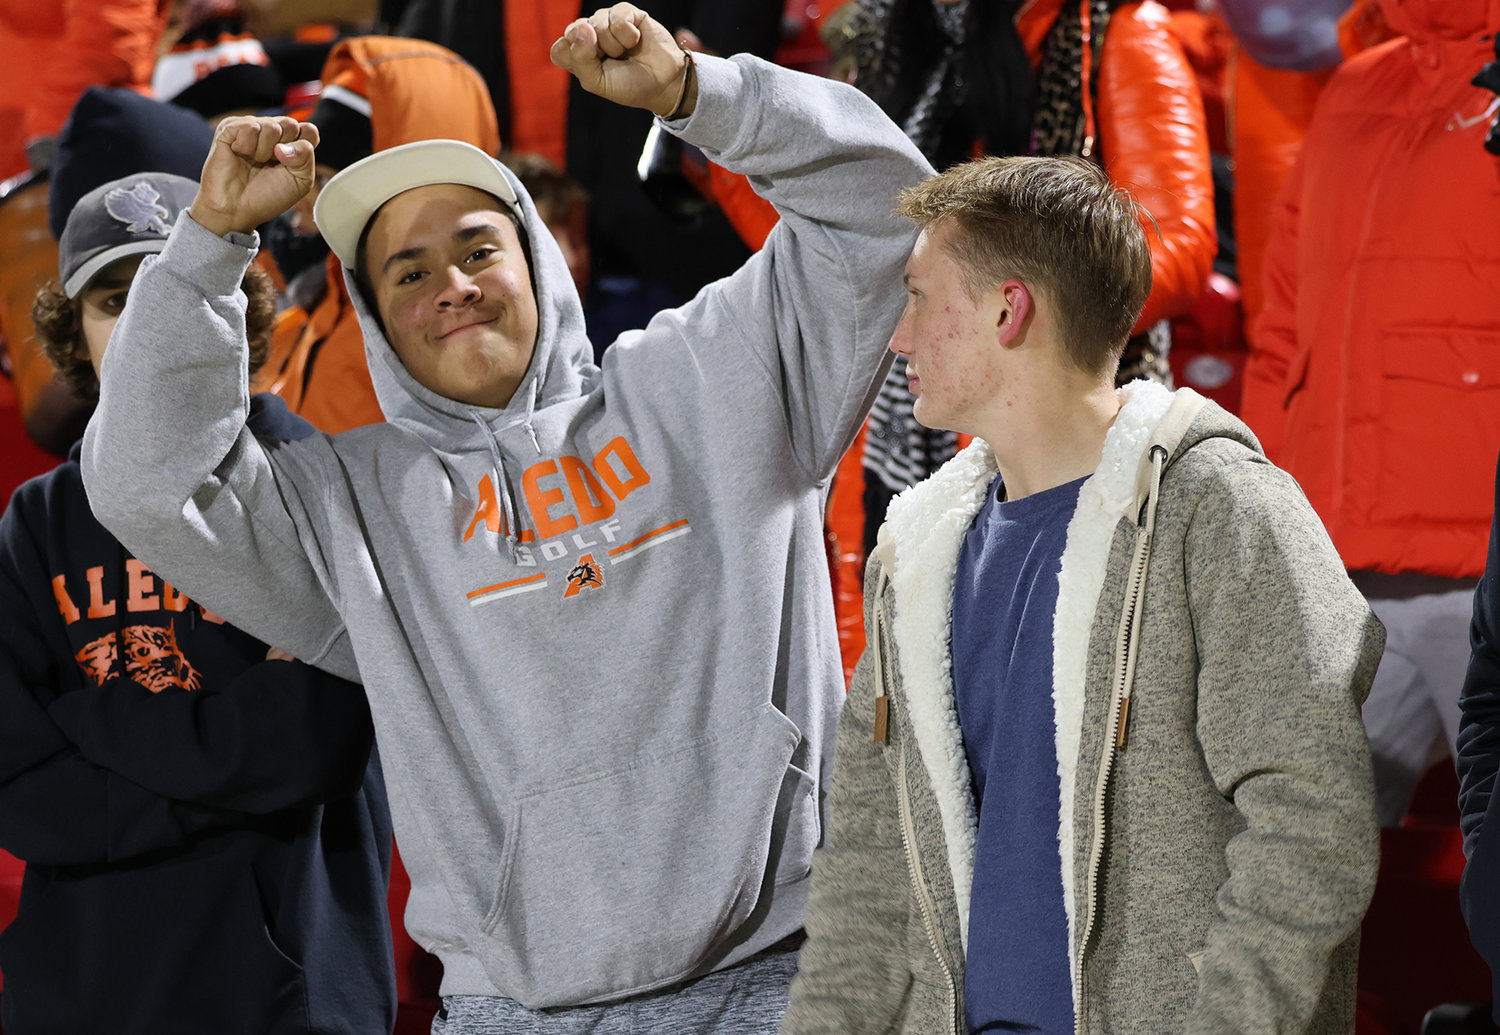 Fans get into the action on a cold night in Sweetwater.